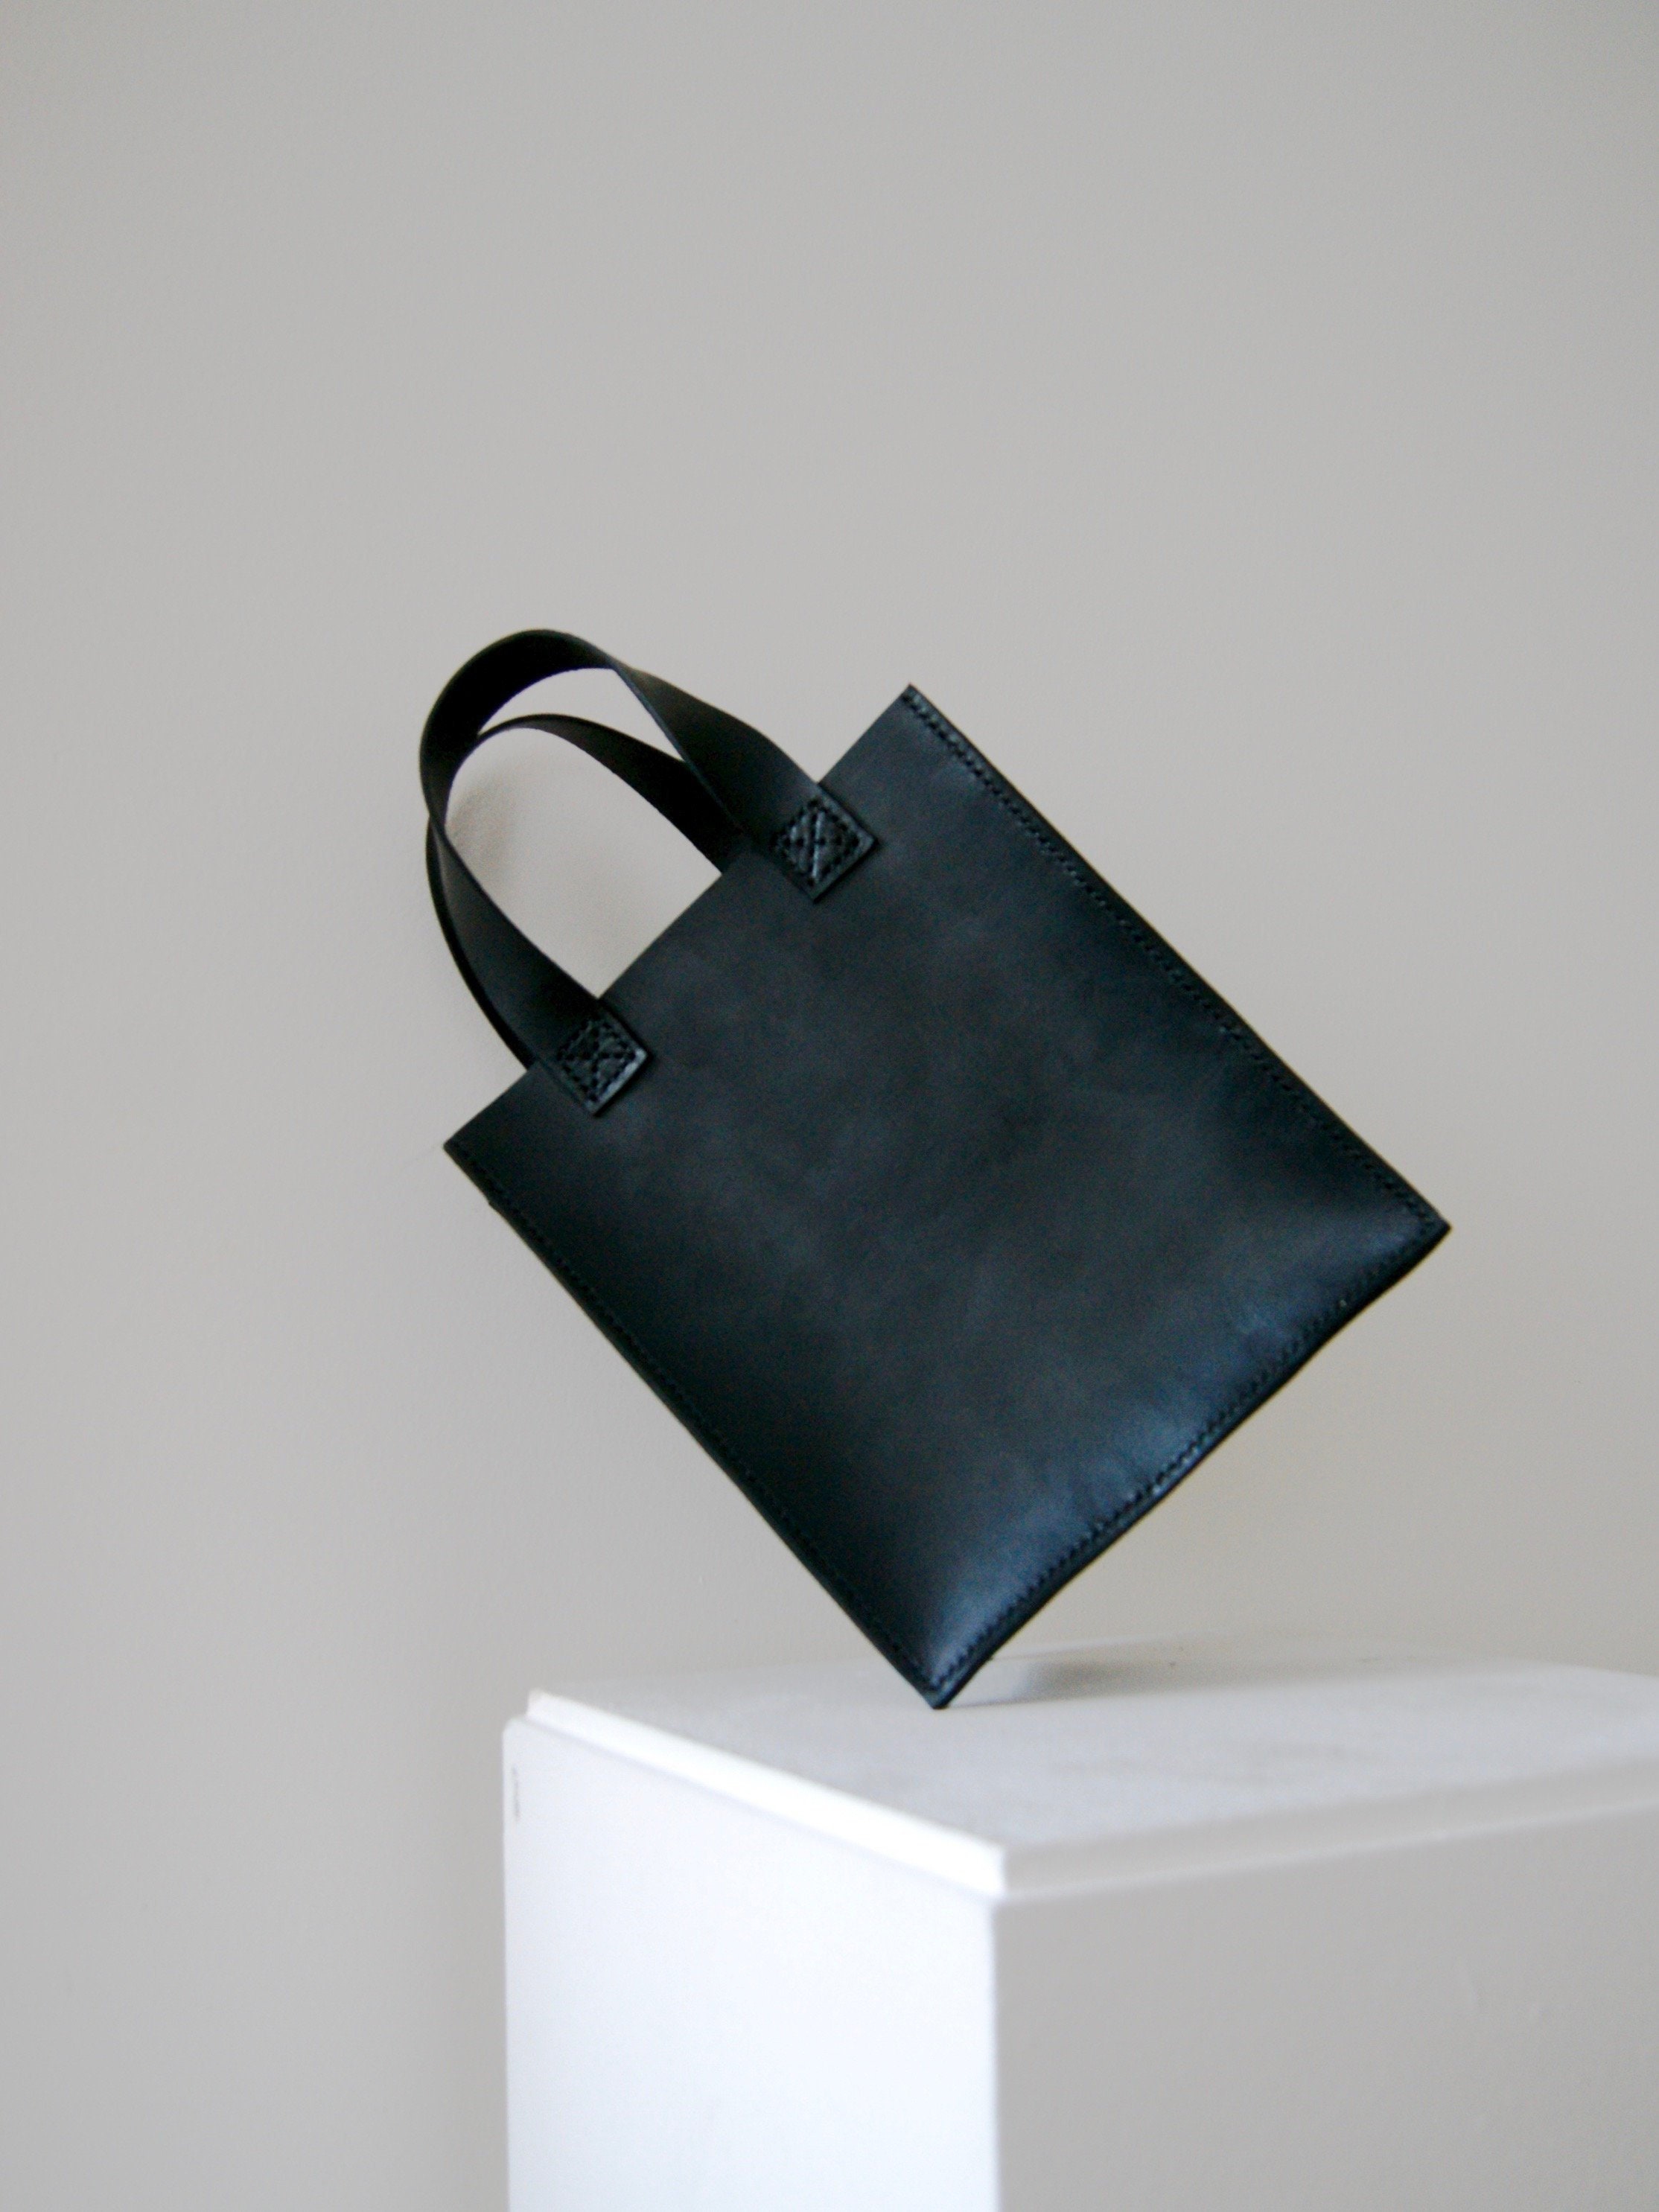 Jour Small Black Vegetable Tanned Leather Tote Bag Handmade - Etsy